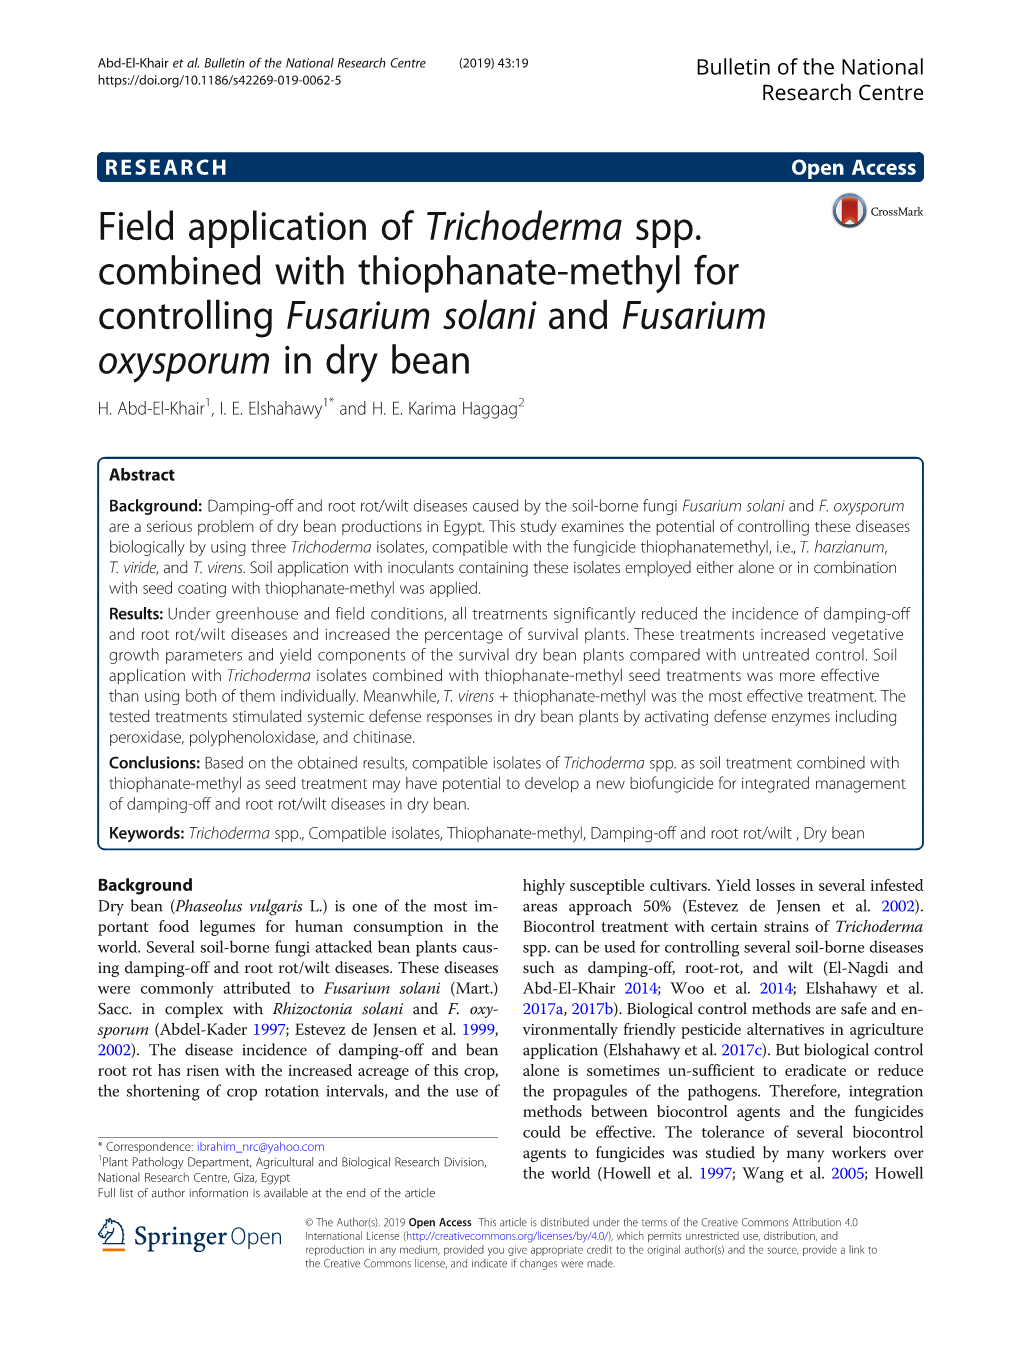 Field Application of Trichoderma Spp. Combined with Thiophanate-Methyl for Controlling Fusarium Solani and Fusarium Oxysporum in Dry Bean H